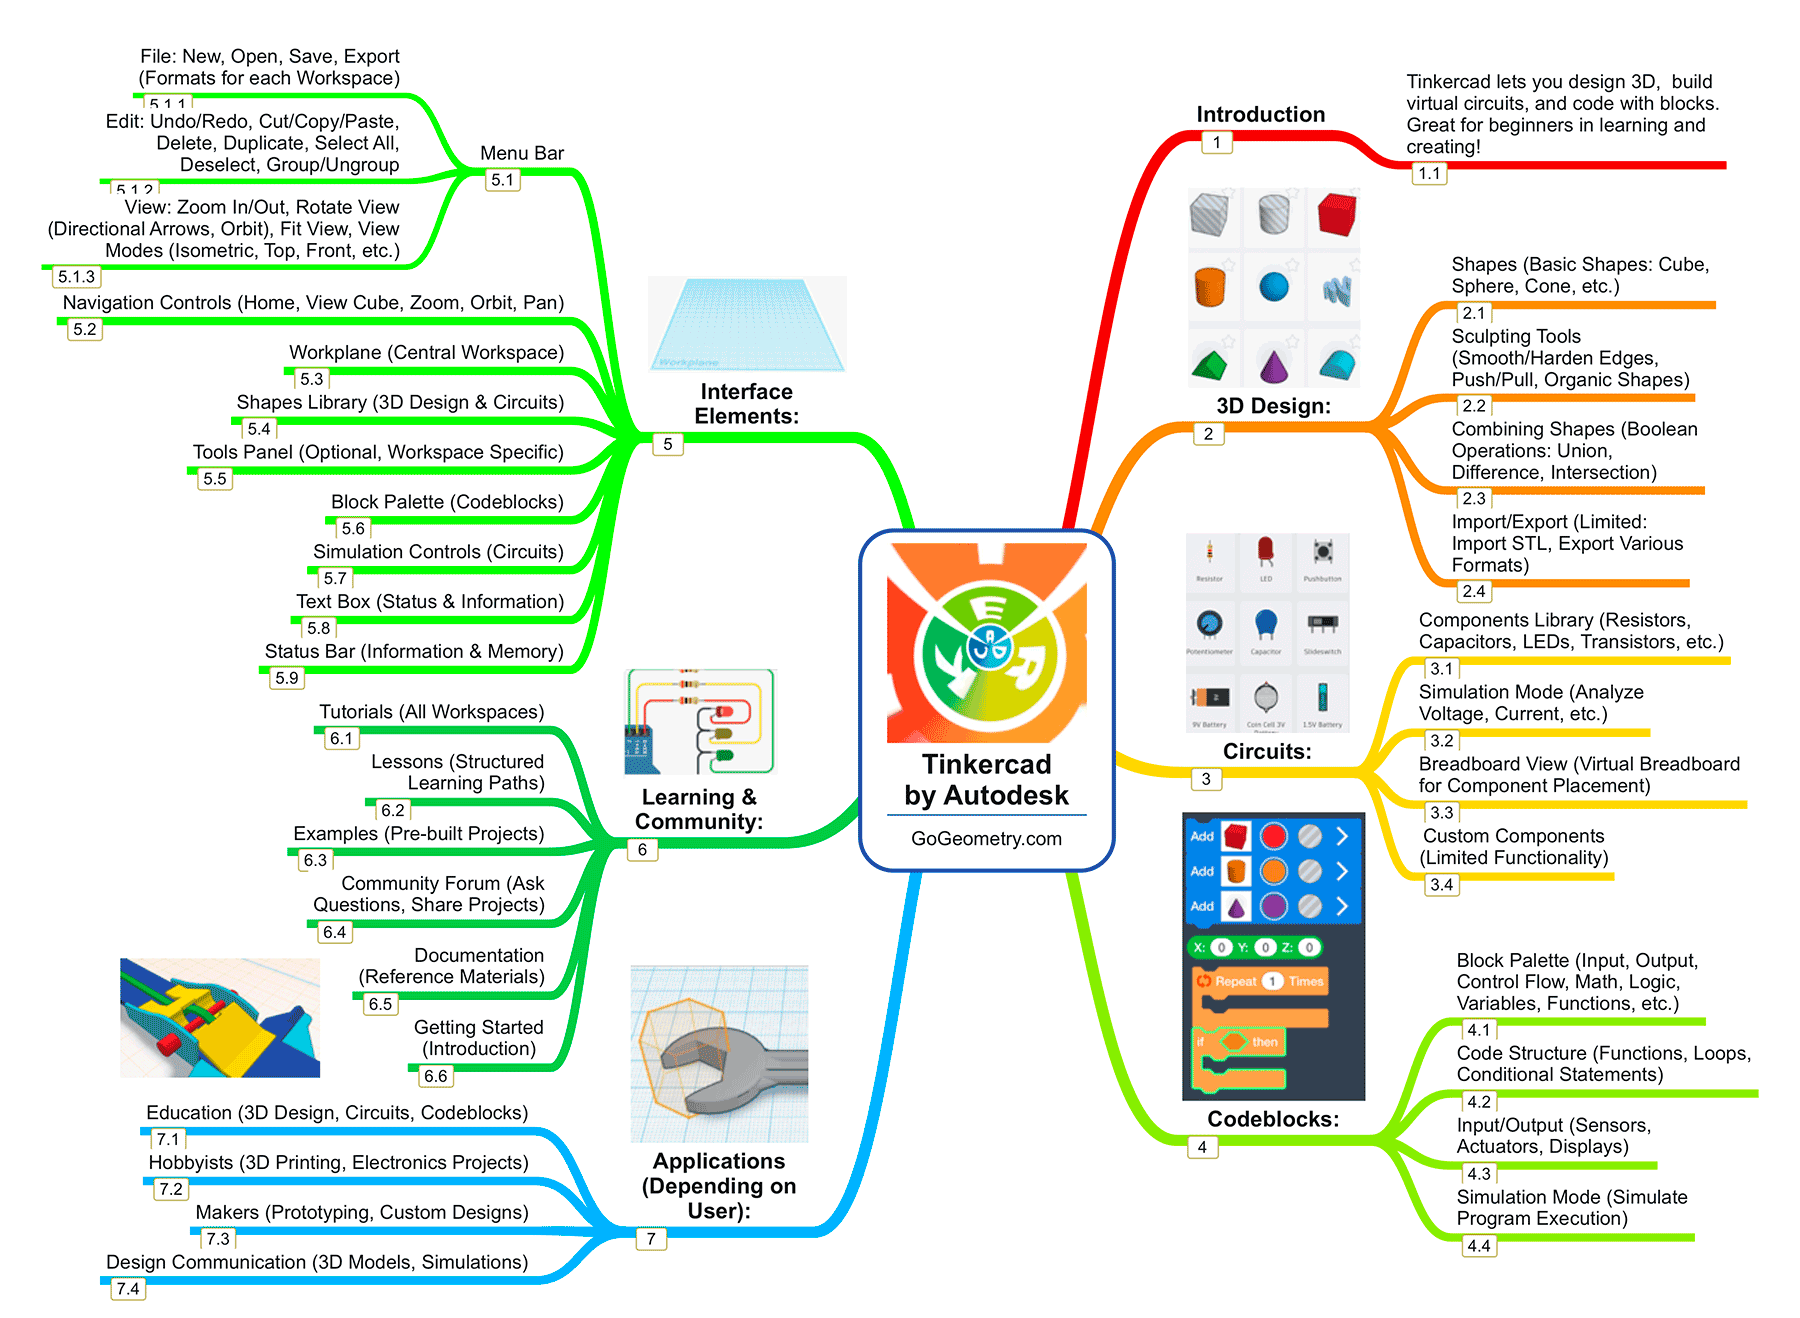 Mind Map of Tinkercad by Autodesk showing simplified constructive solid geometry methods